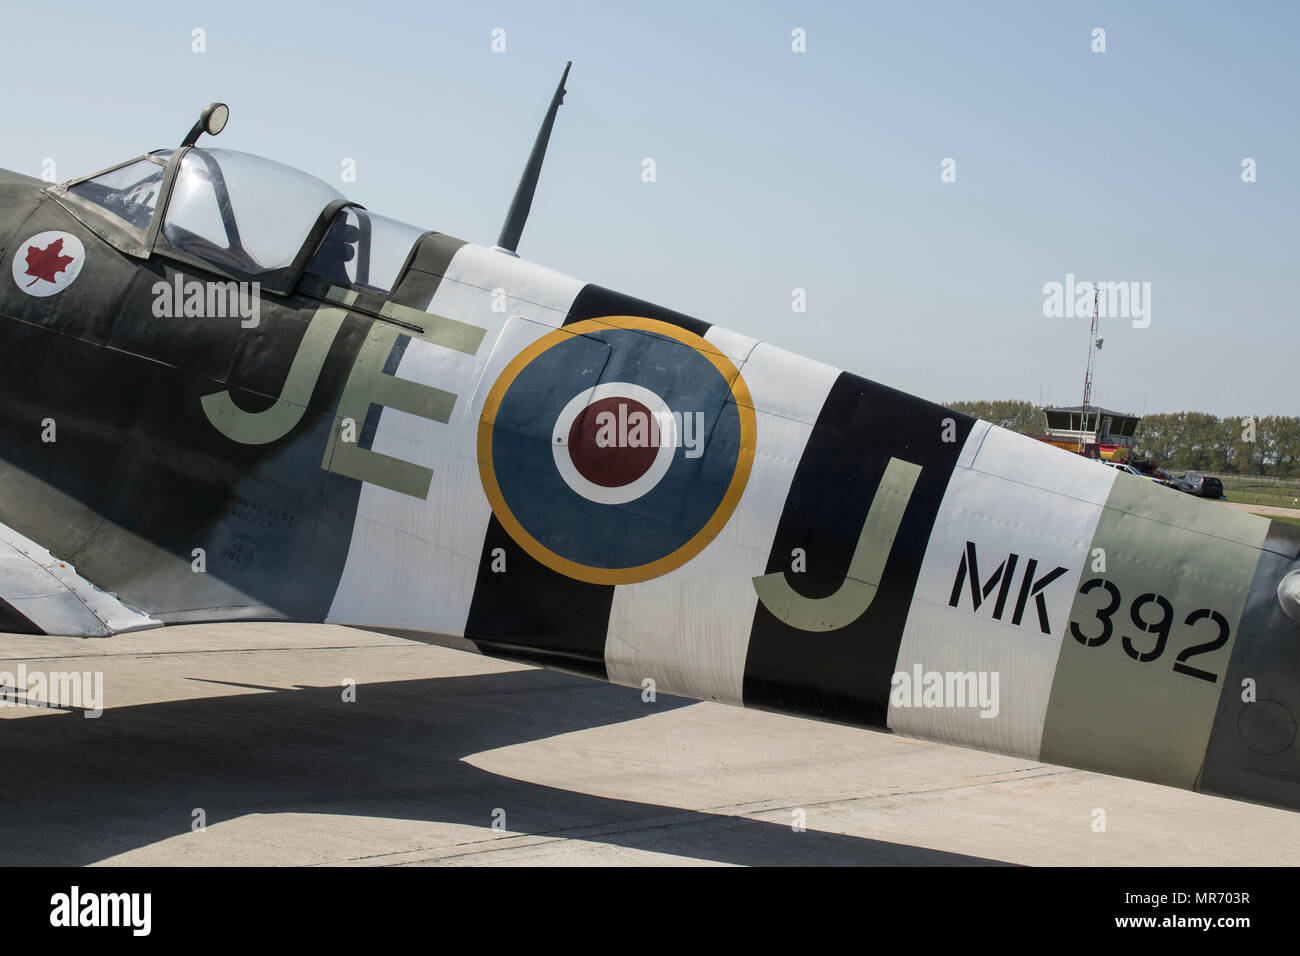 A vintage Spitfire MK 392 parked at Goodwood Aerodrome at Goodwood, Sussex,  UK. This plane was flown by Air Vice Marshal James Edgar Johnson, CB, CBE Stock Photo